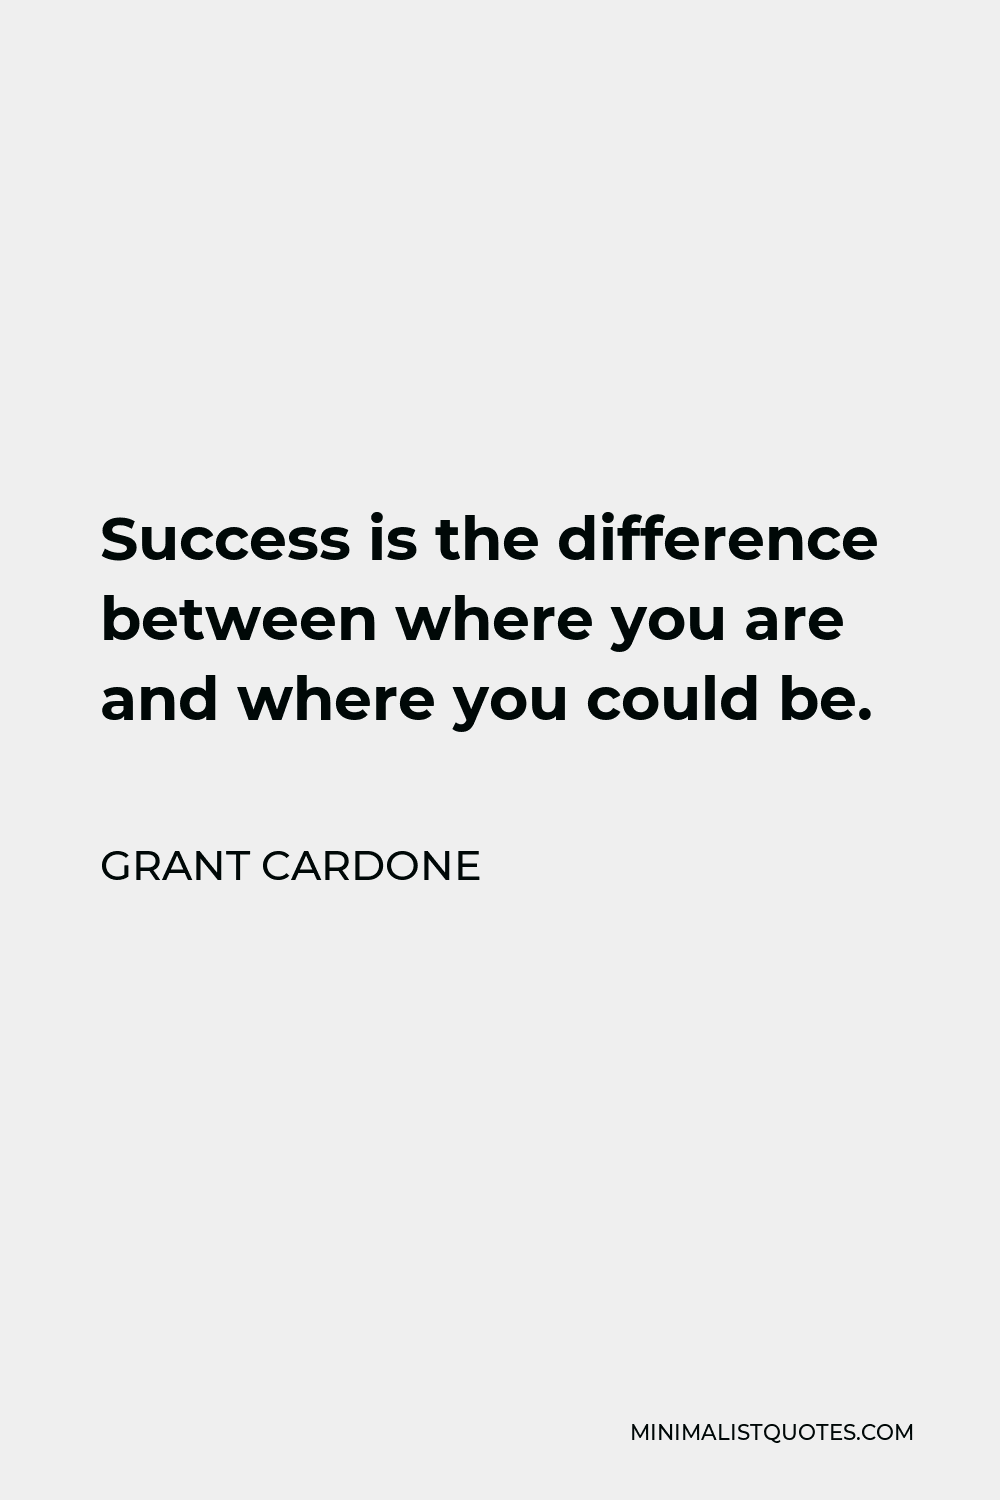 Grant Cardone Quote - Success is the difference between where you are and where you could be.